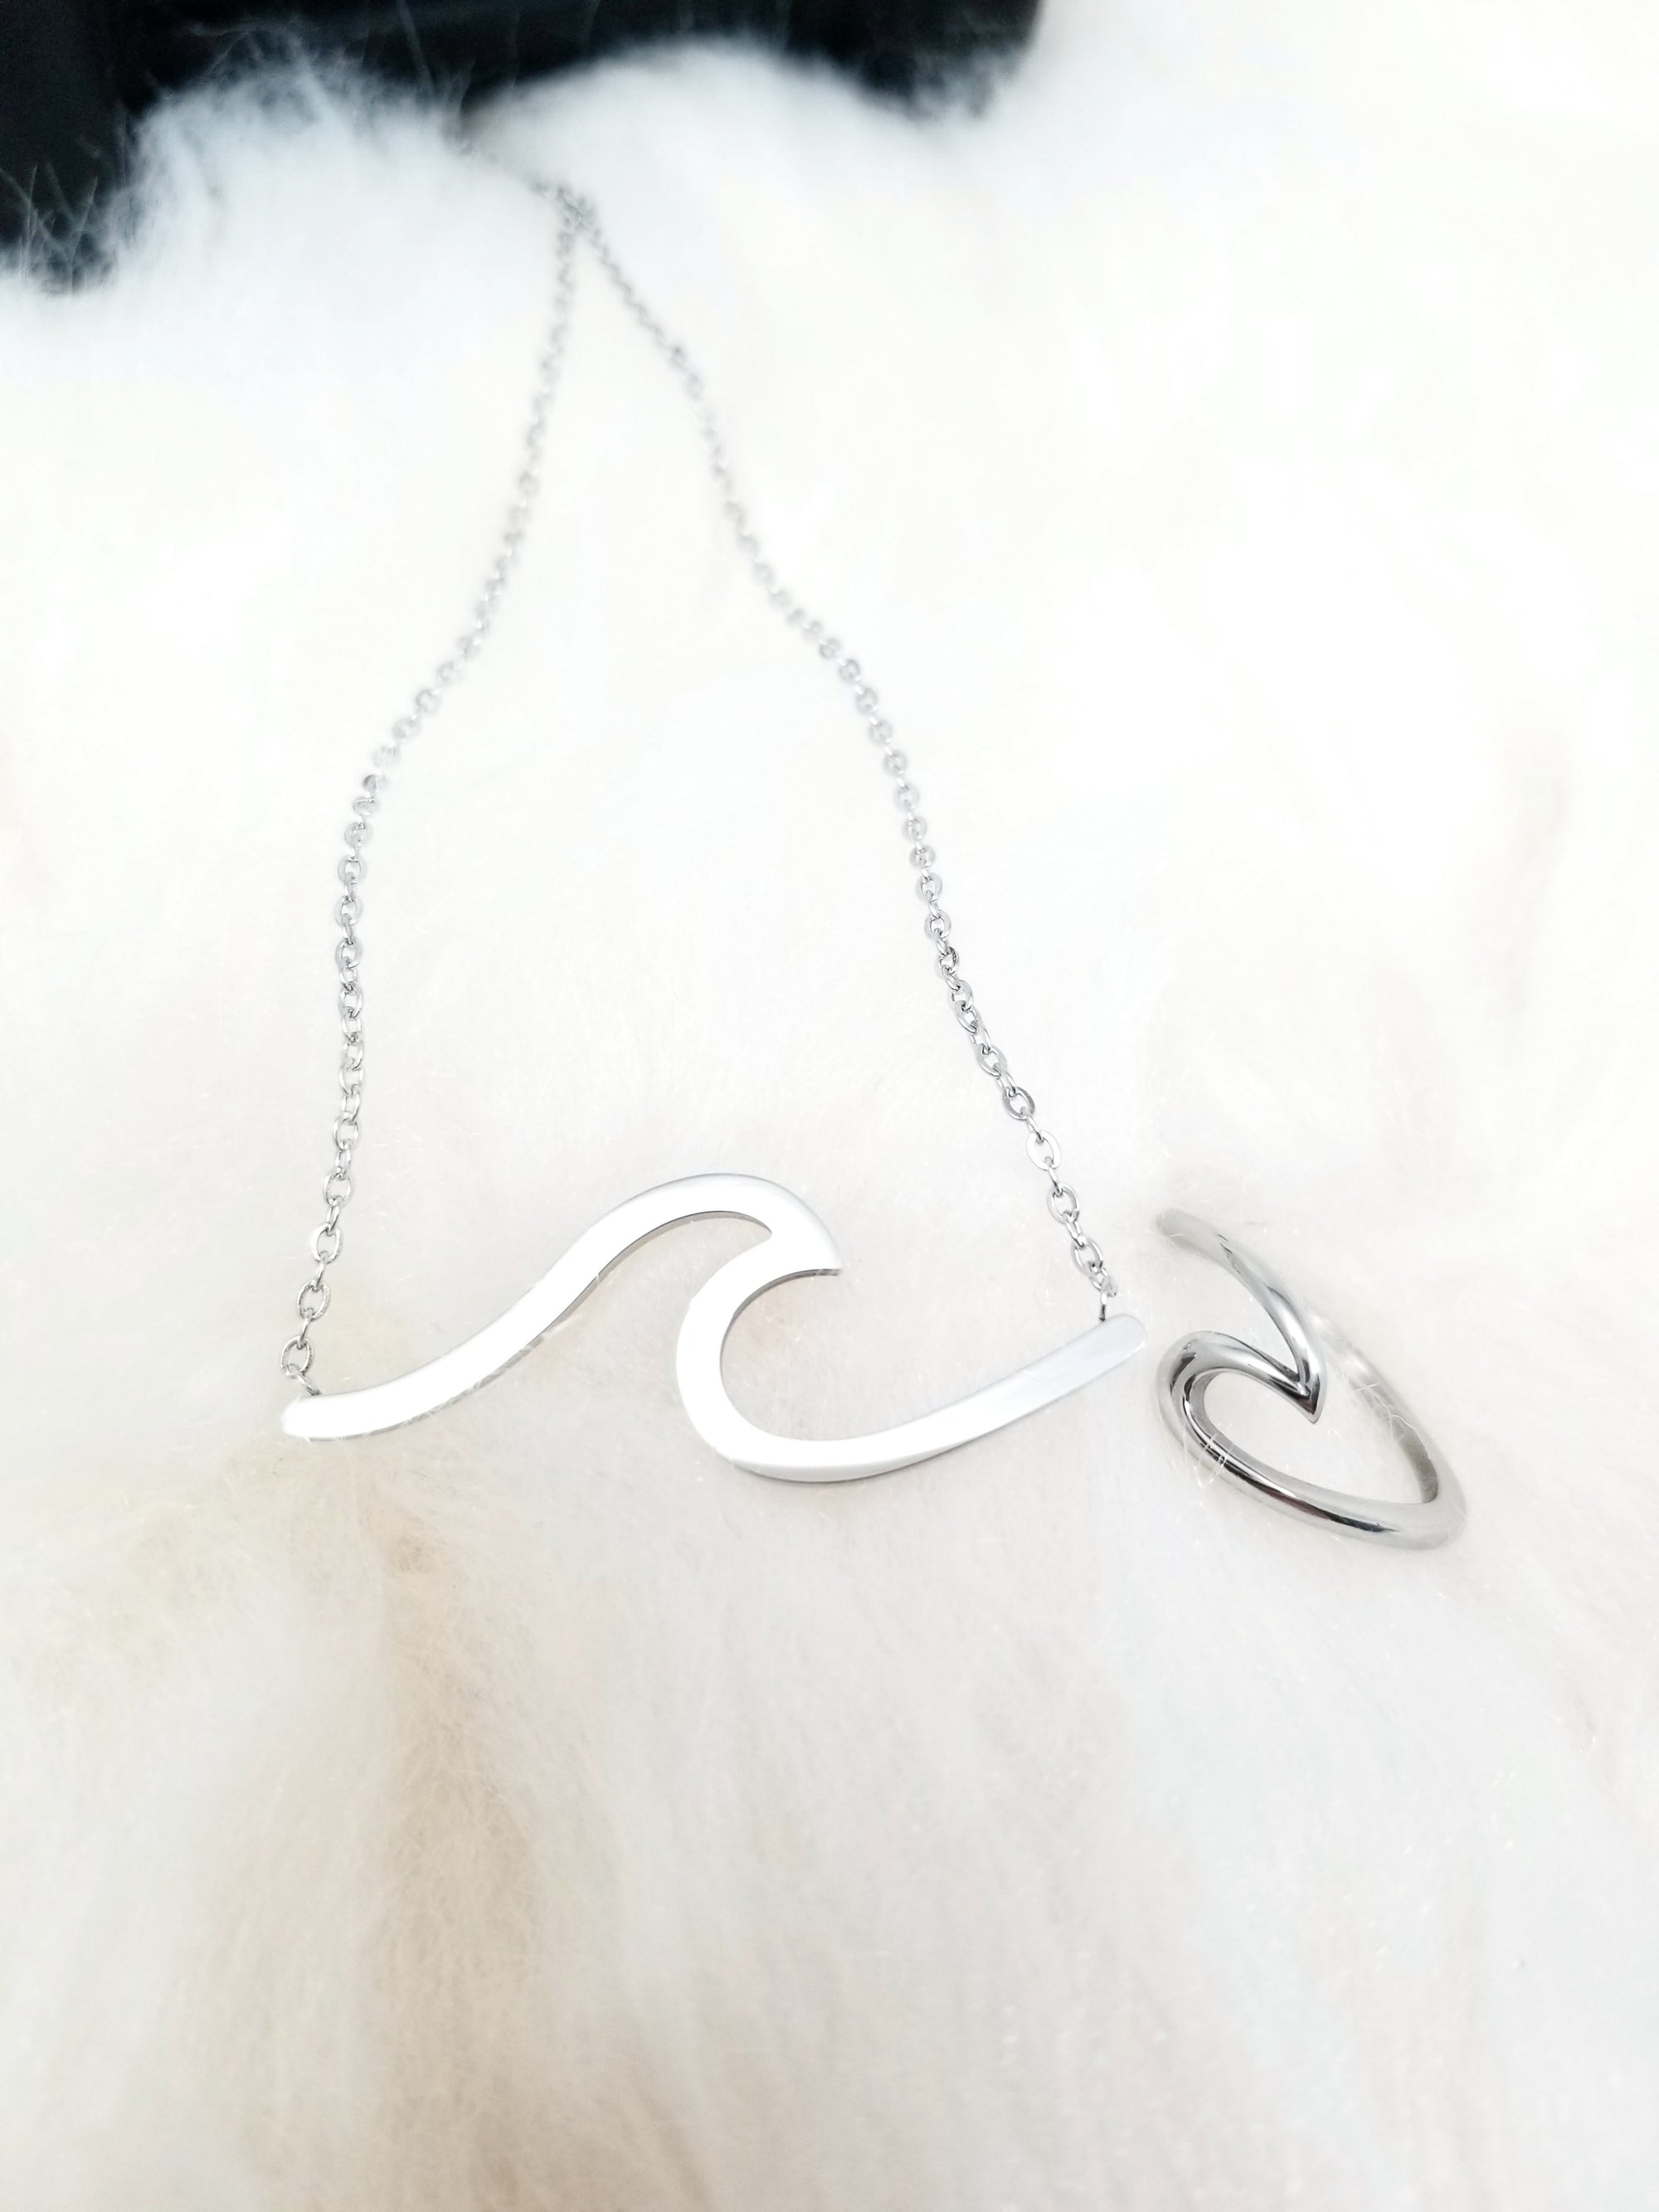 Waves Necklace, Beach Lover Necklace, Wave Jewelry, Wave Ring, Beach Collection